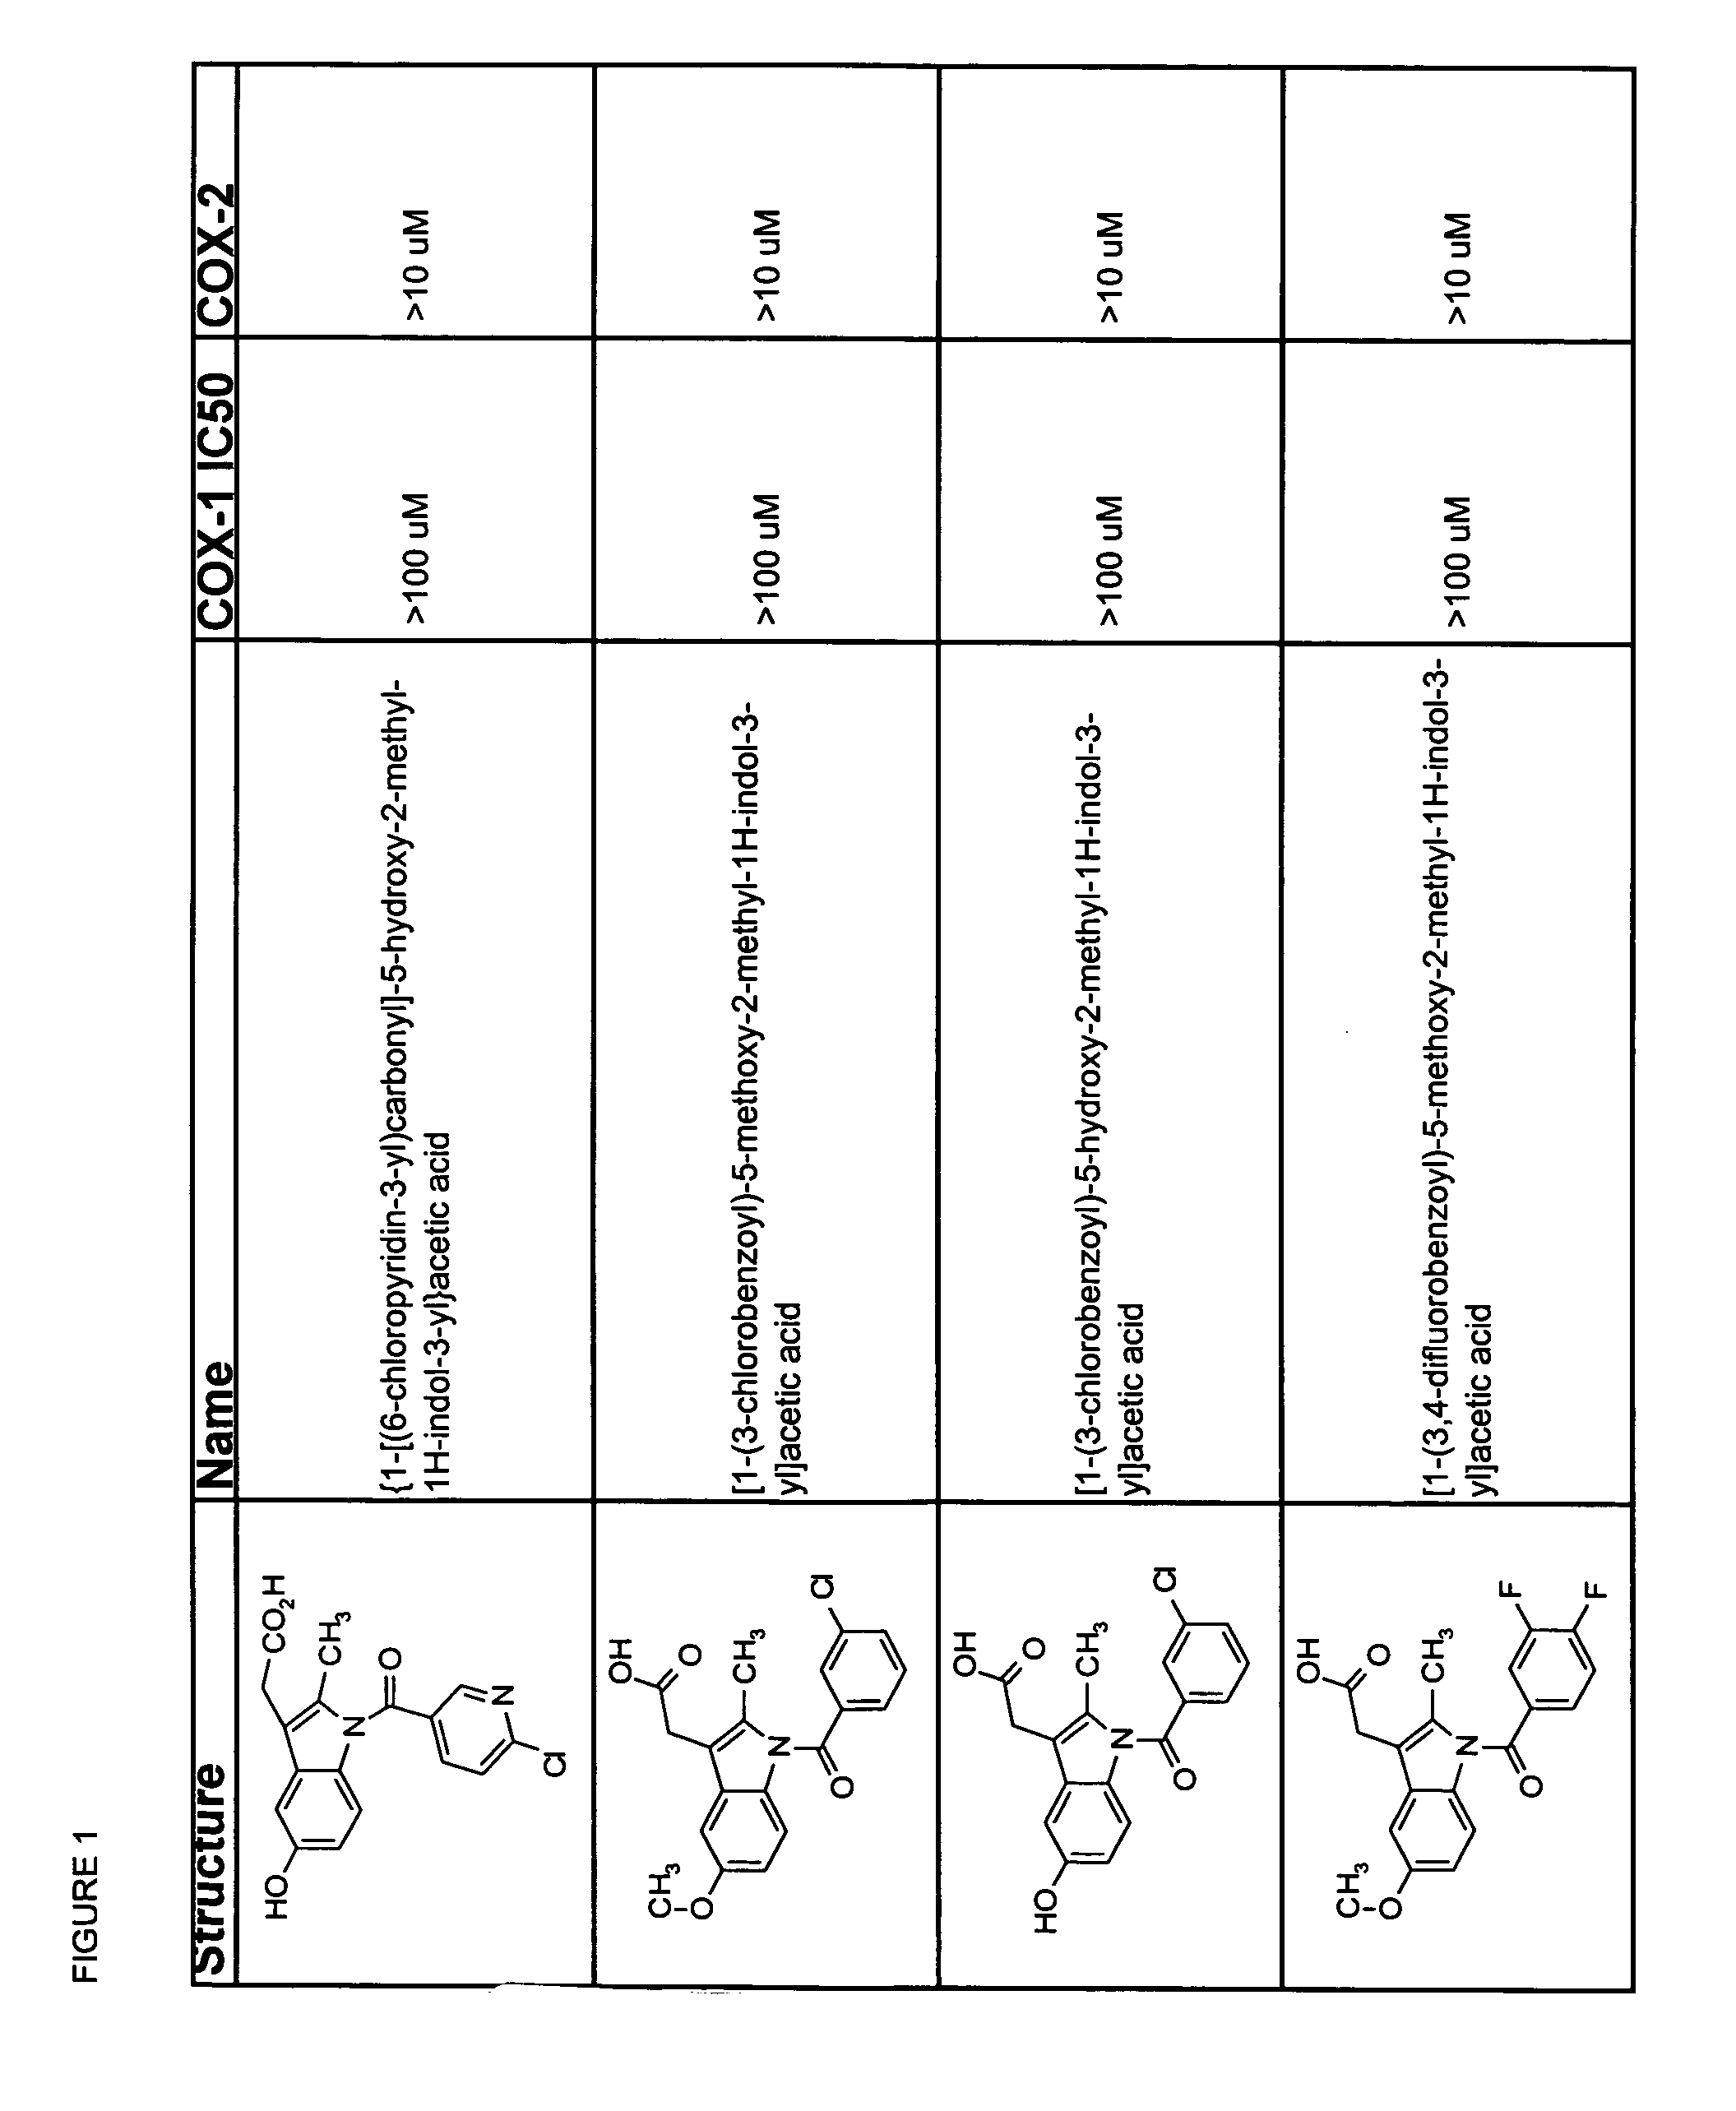 Methods for the protection of memory and cognition